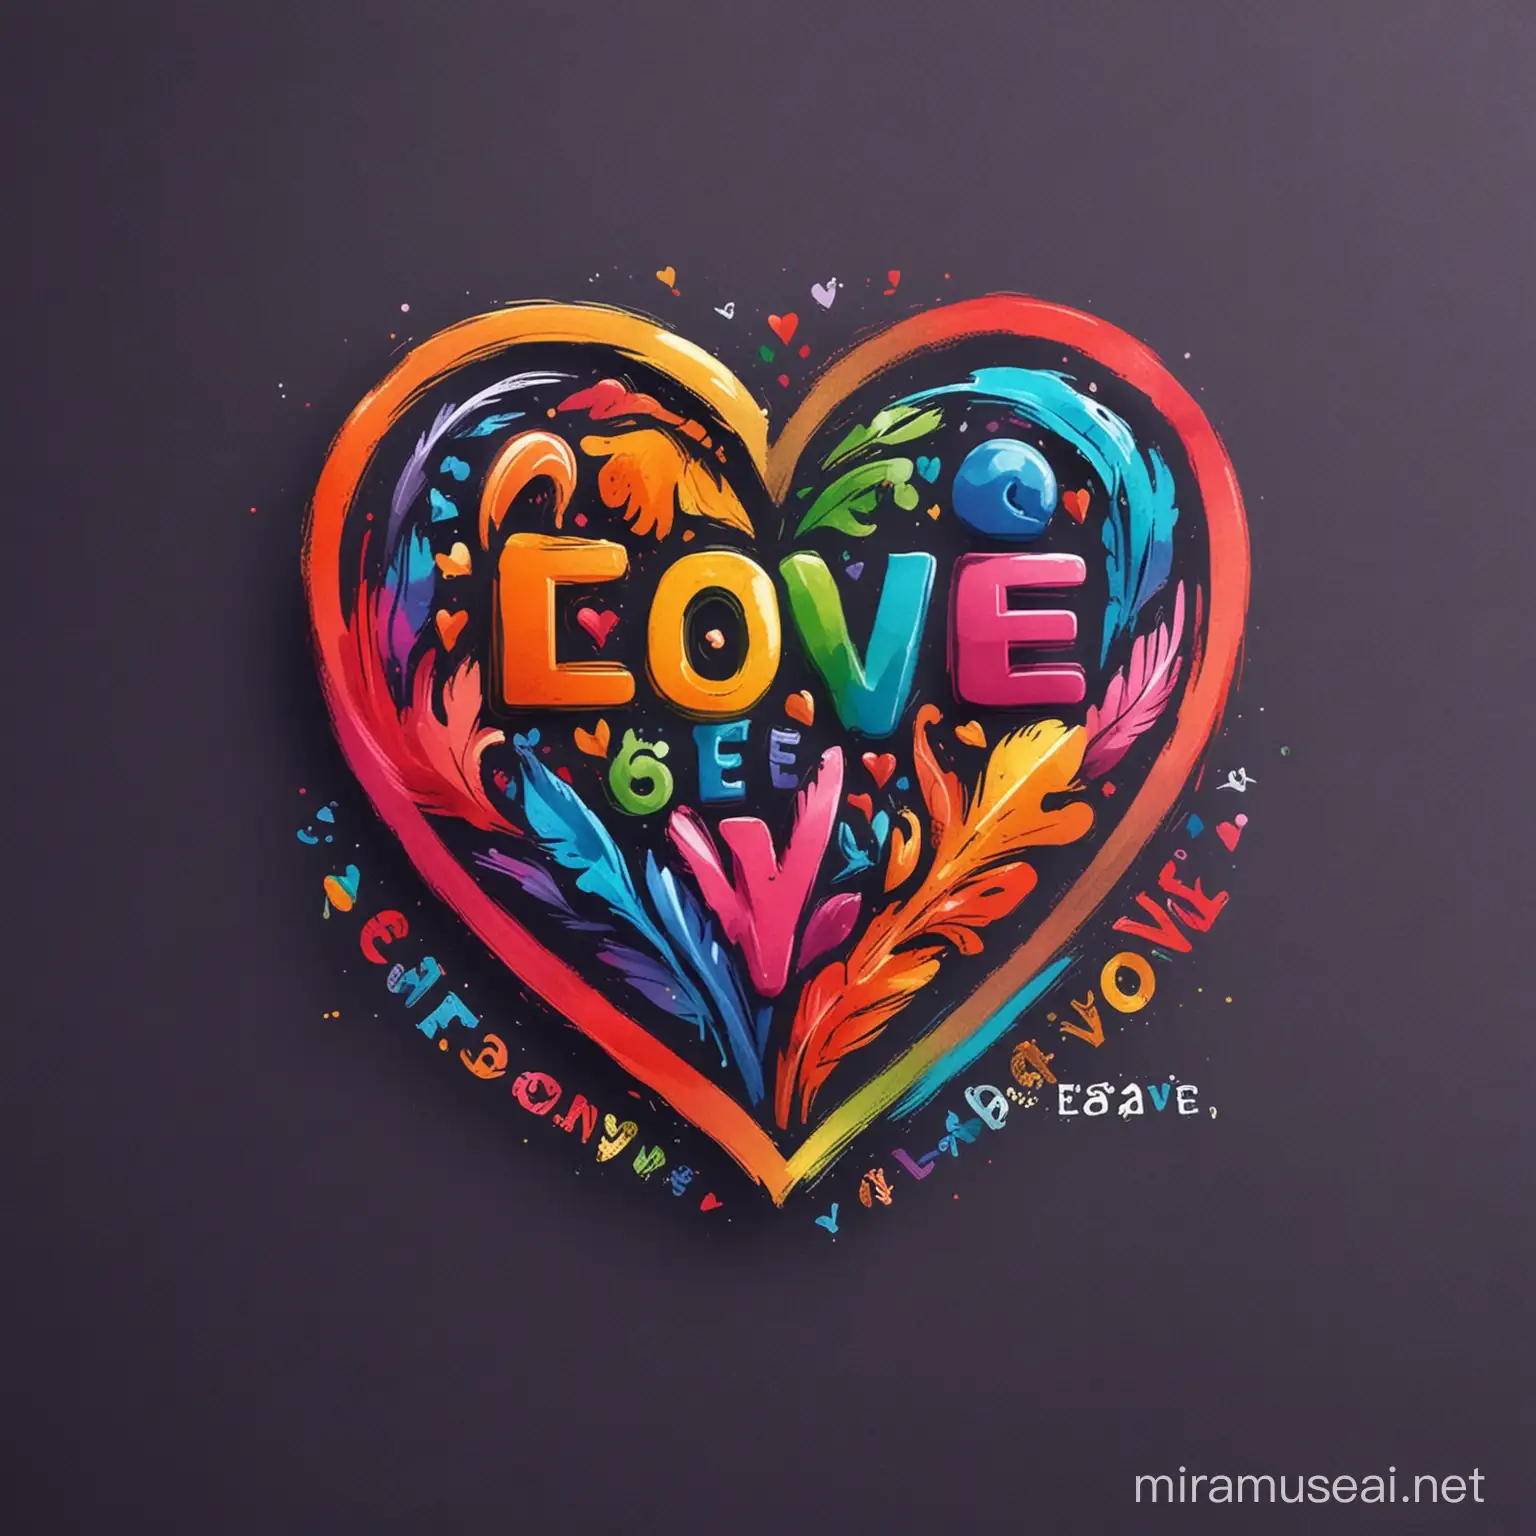 create a colourful  logo expressing the idea of love in education
